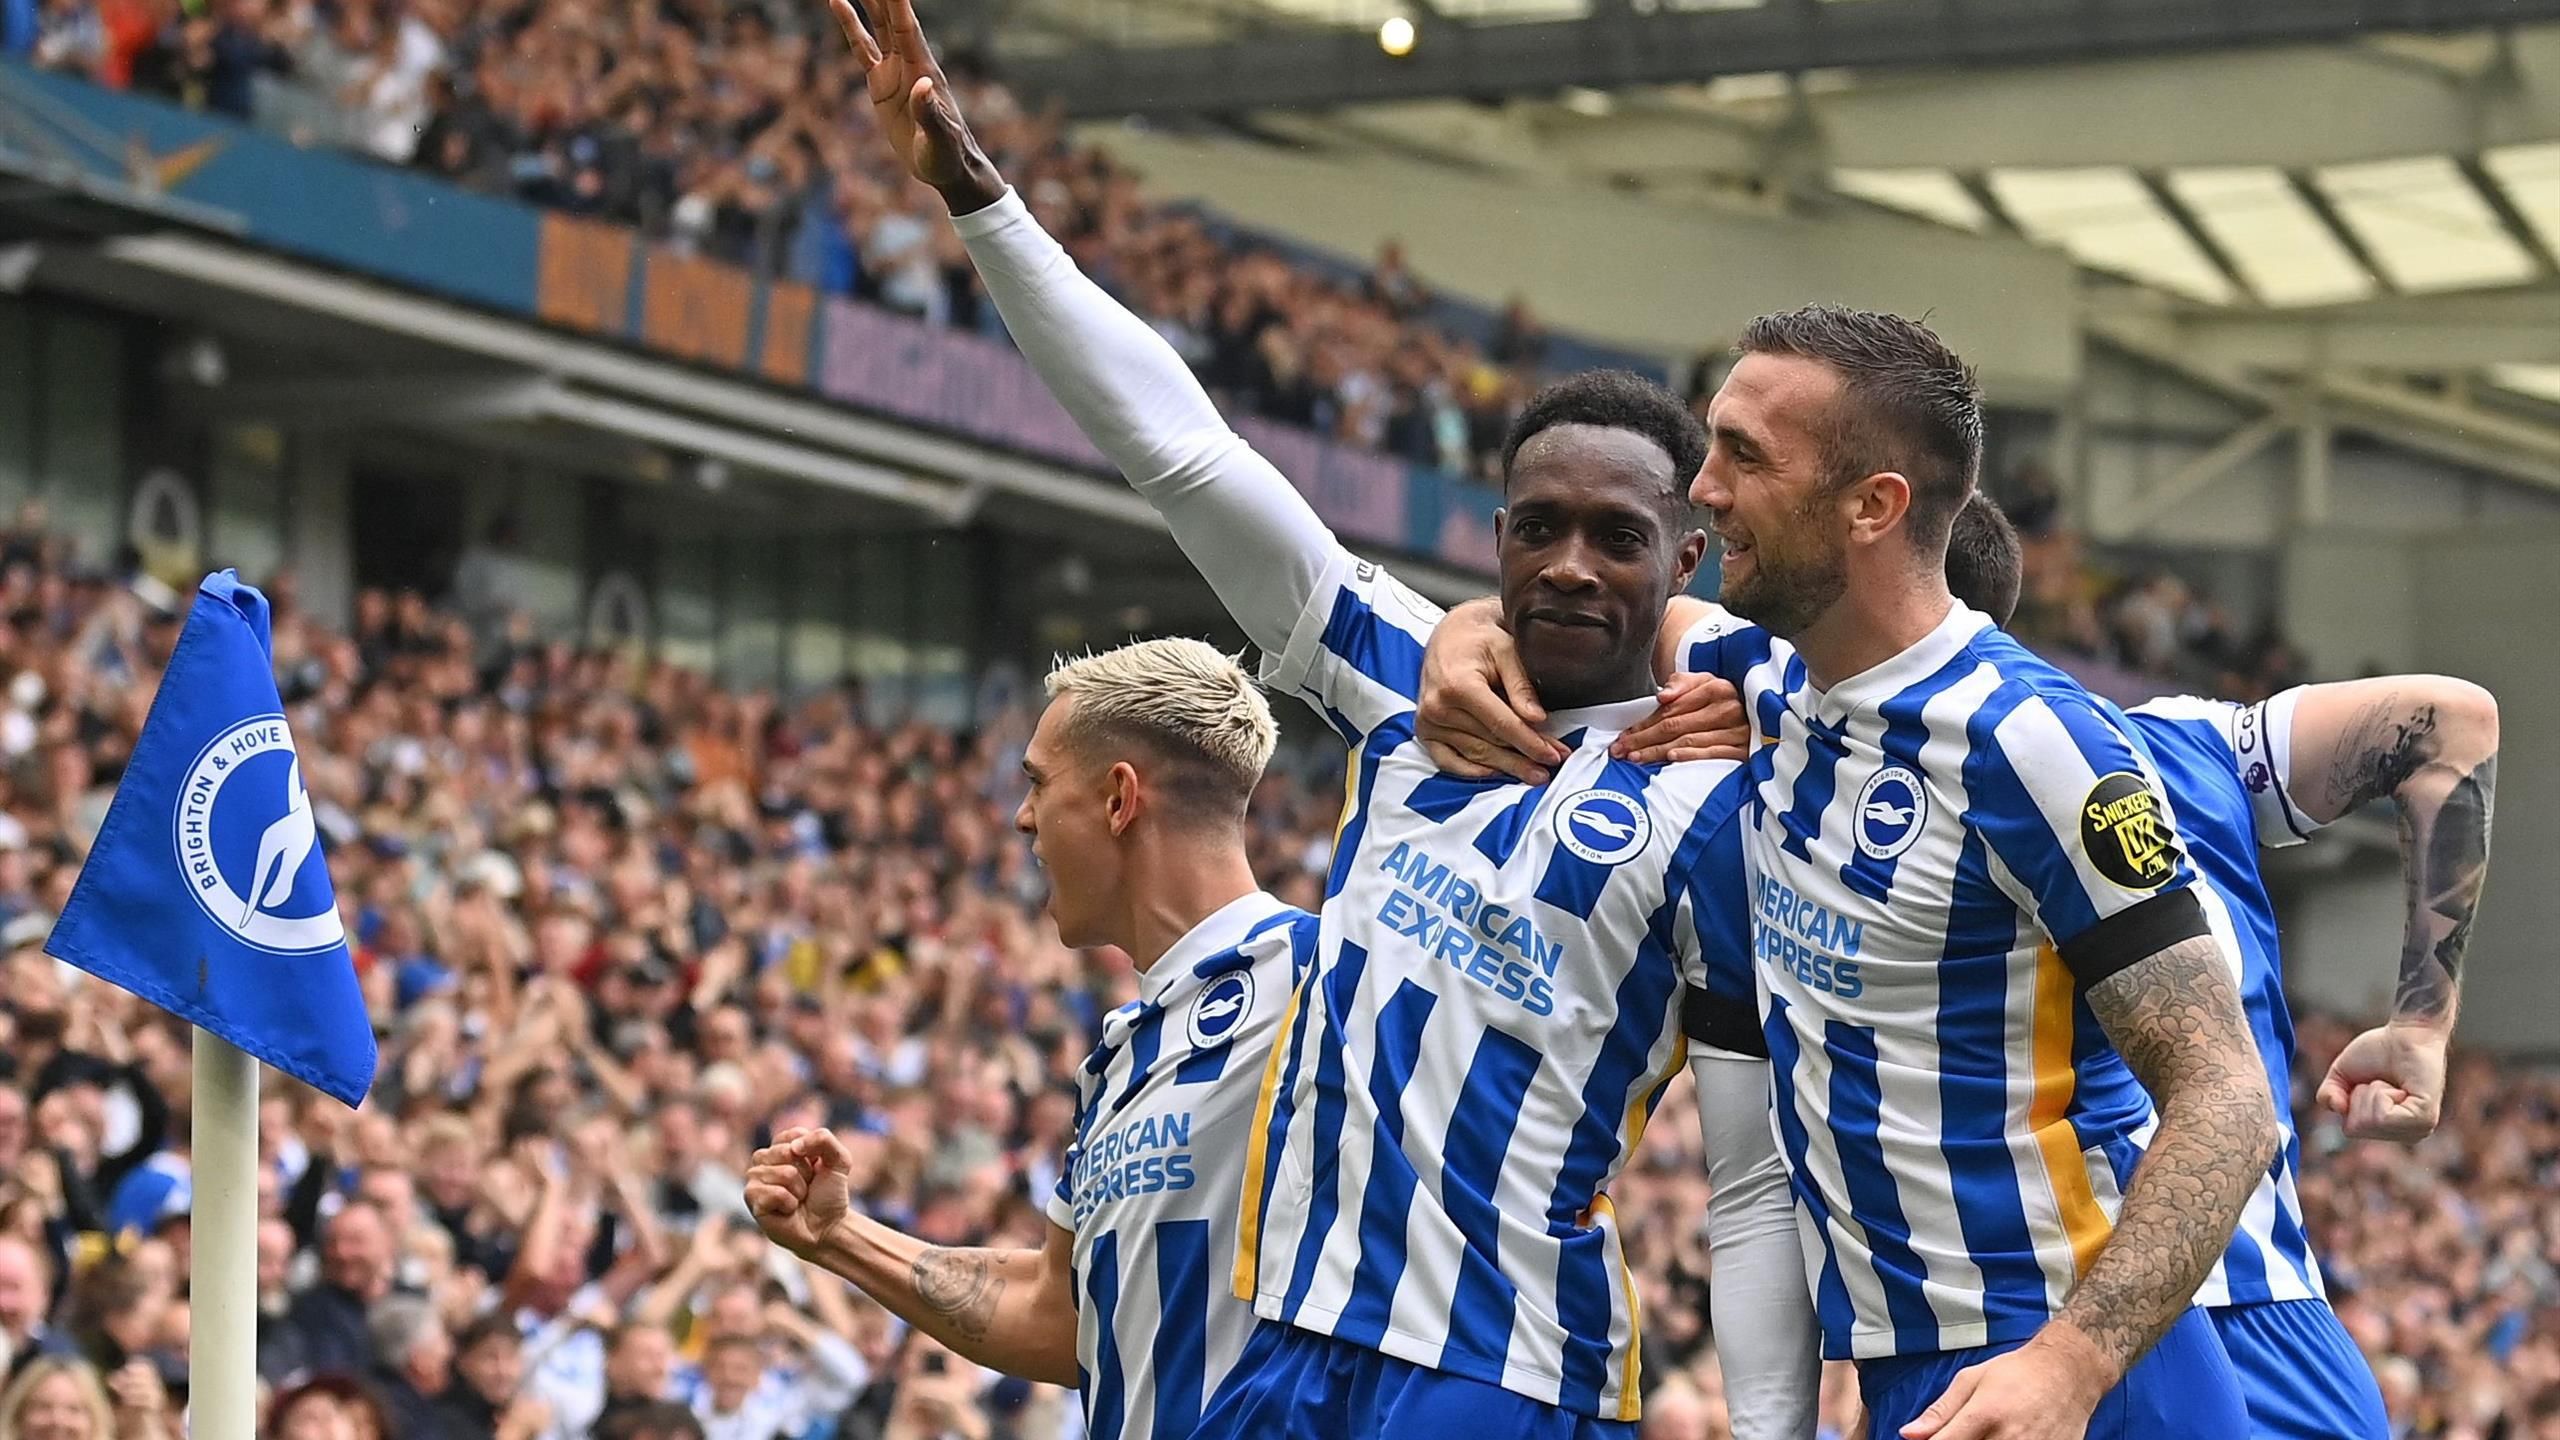 14 Facts About Brighton & Hove Albion - Facts.net